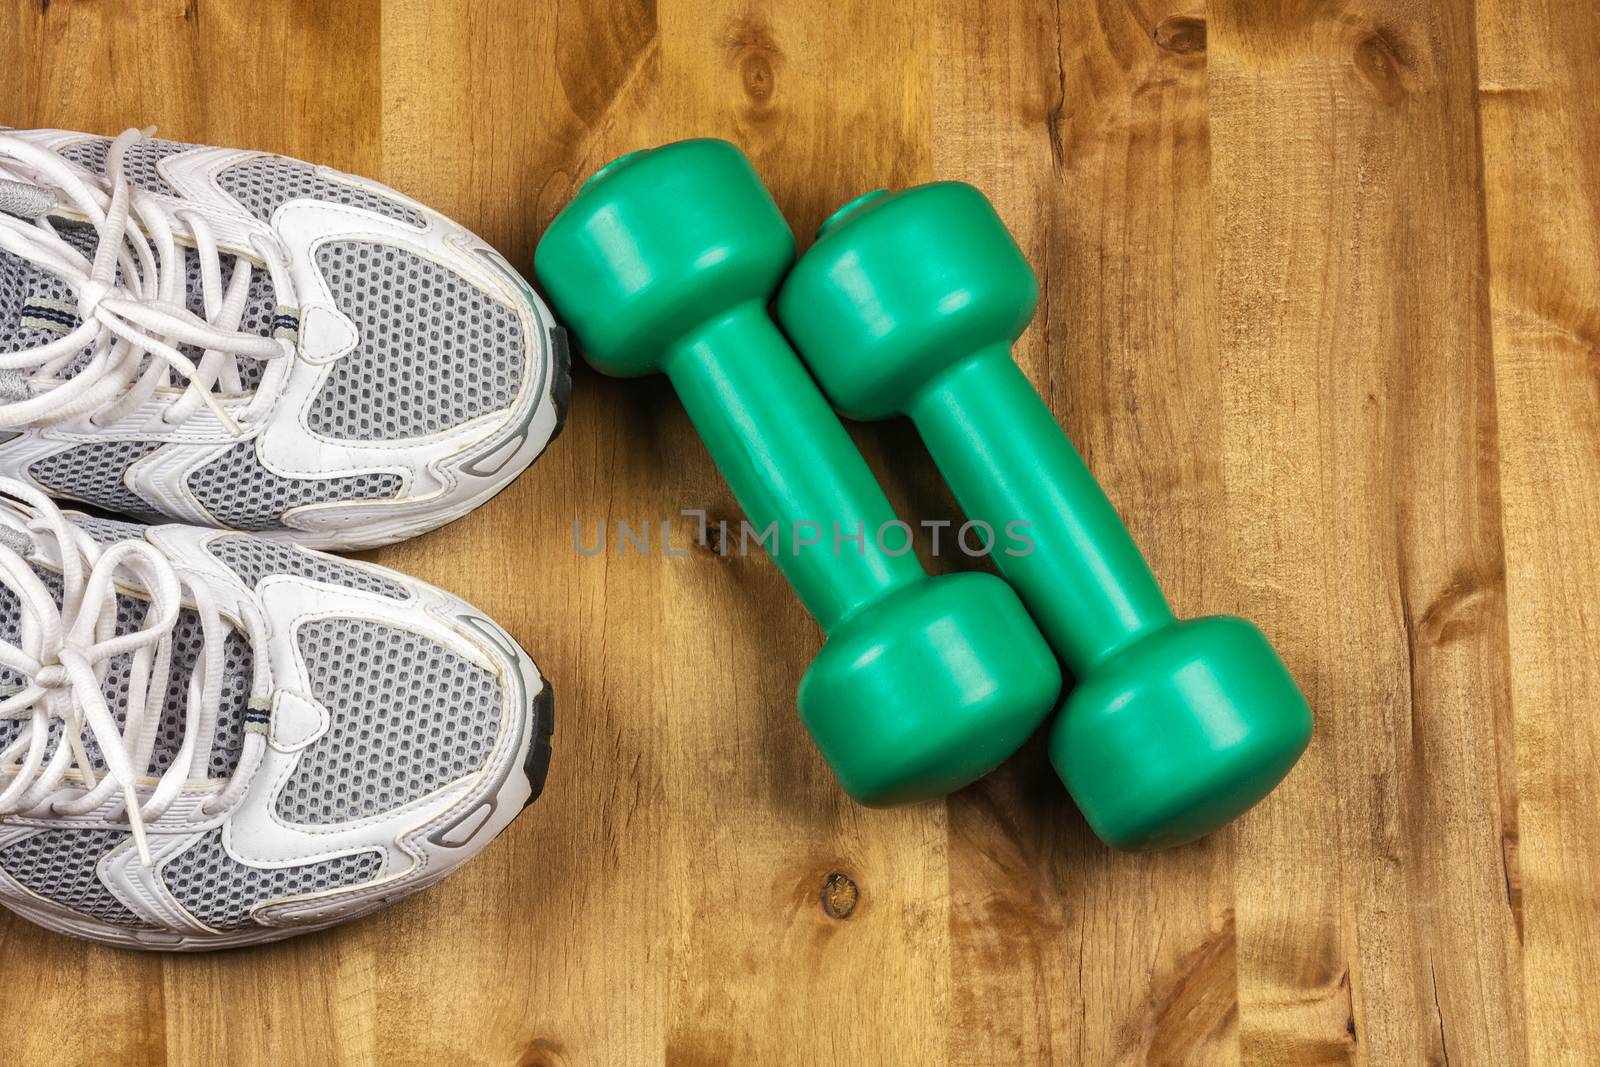 On the wooden floor are two dumbbells and a pair of white sneakers